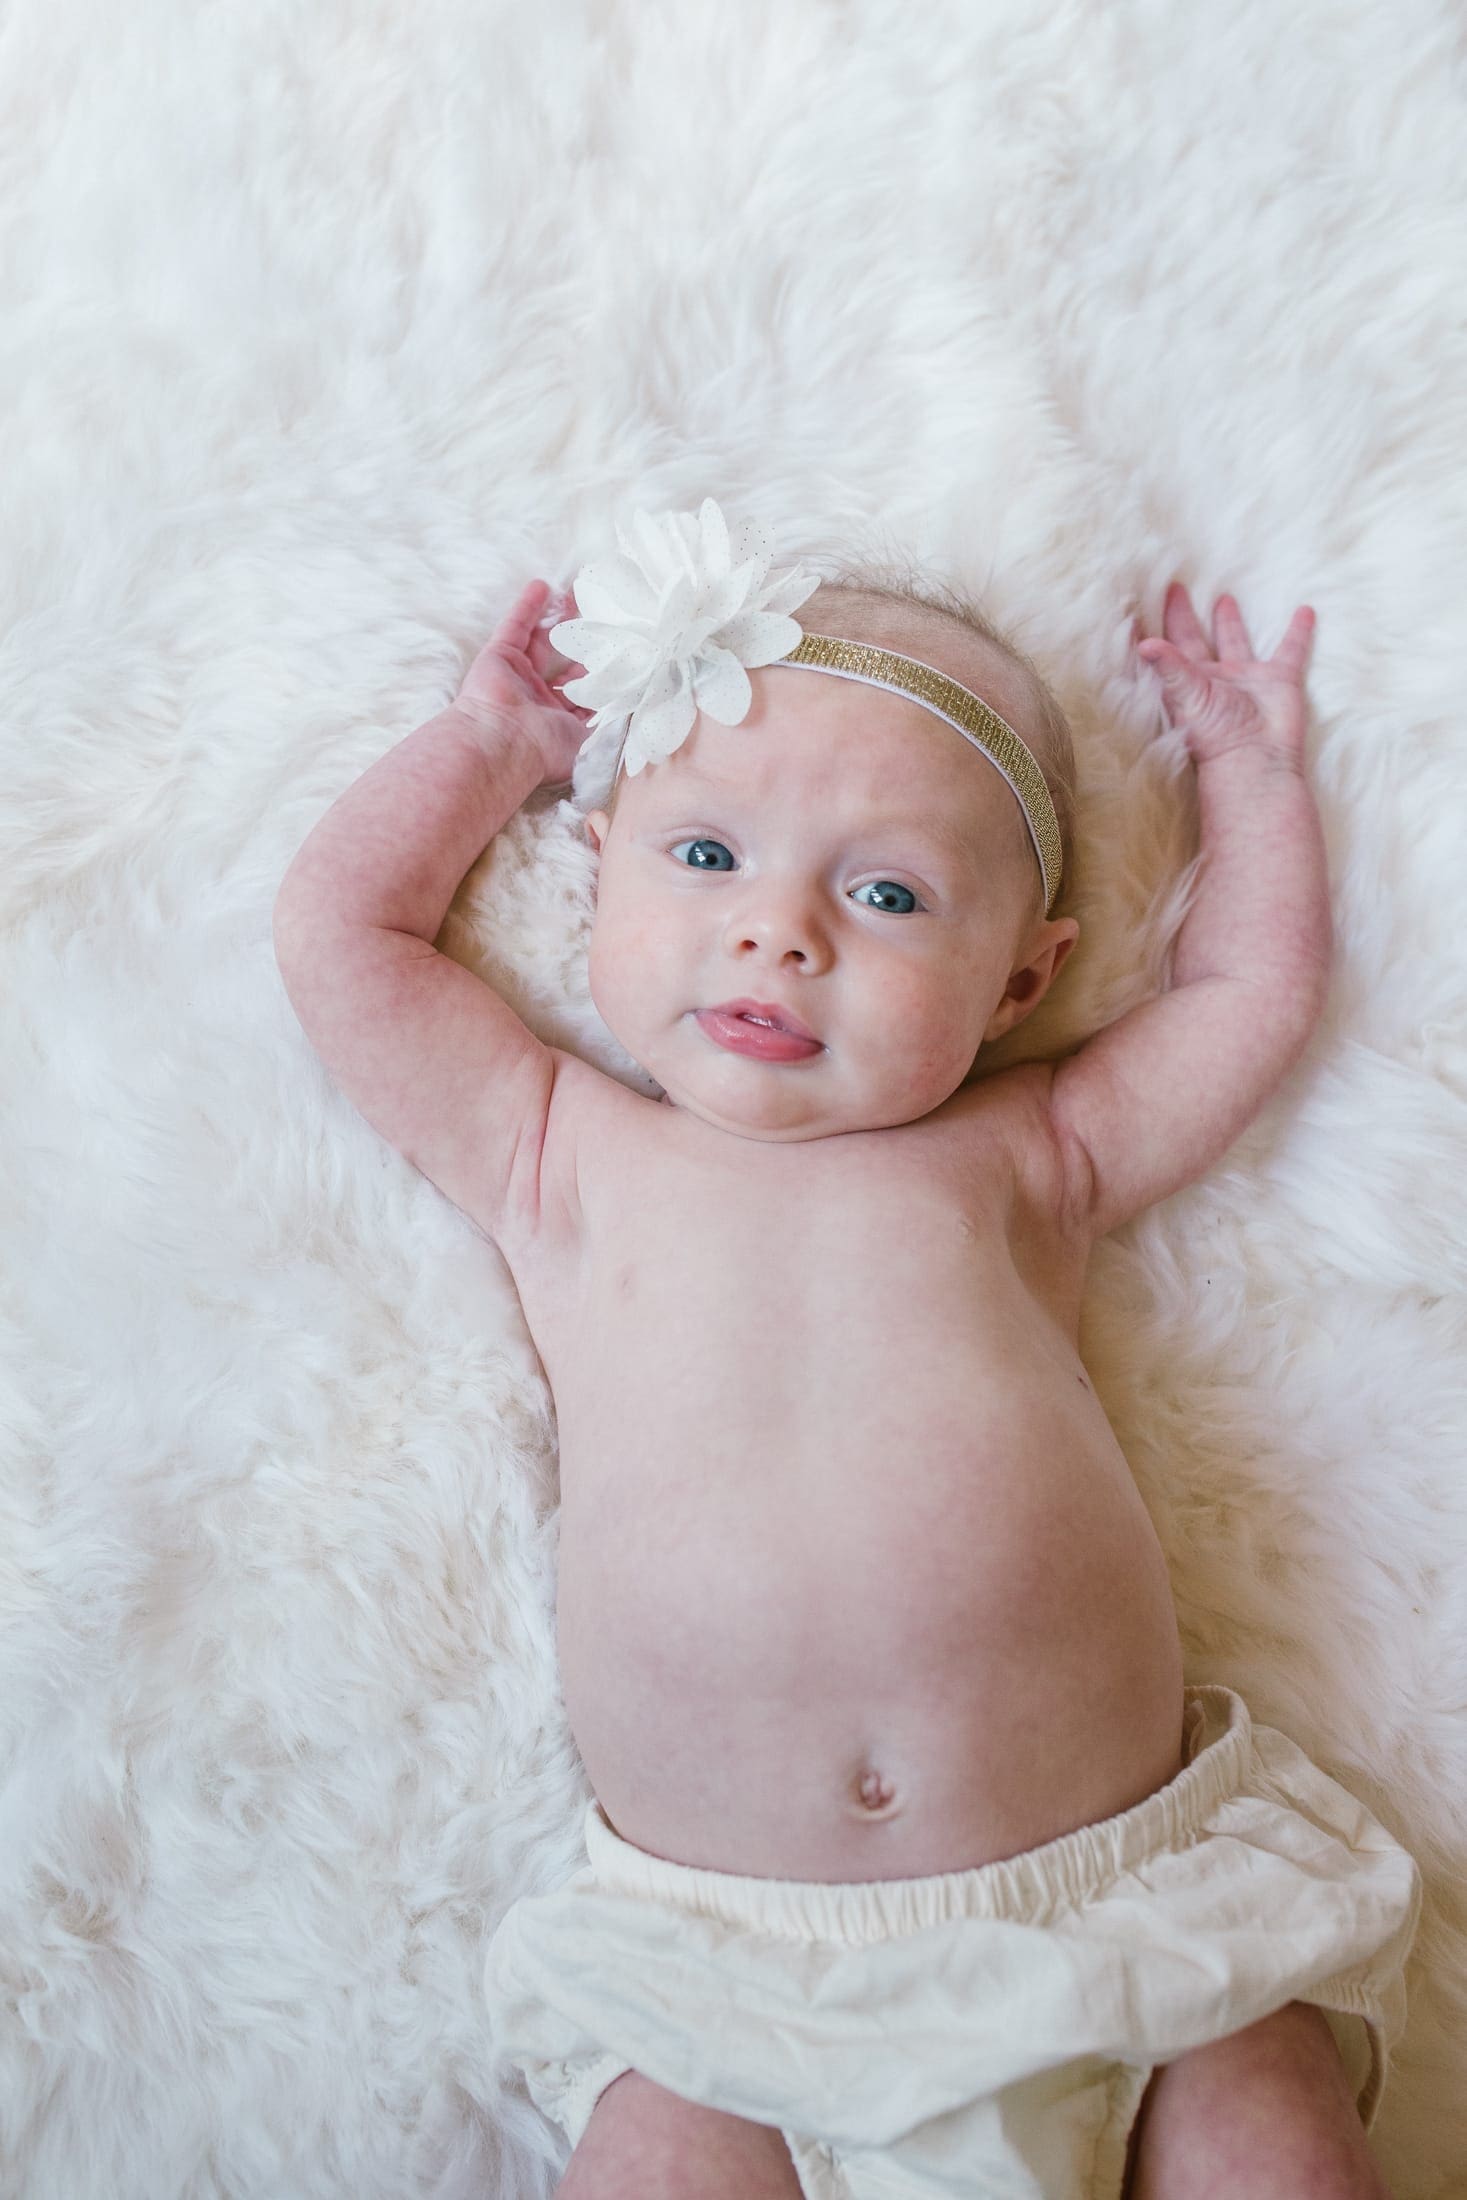 3 month old with blue eyes